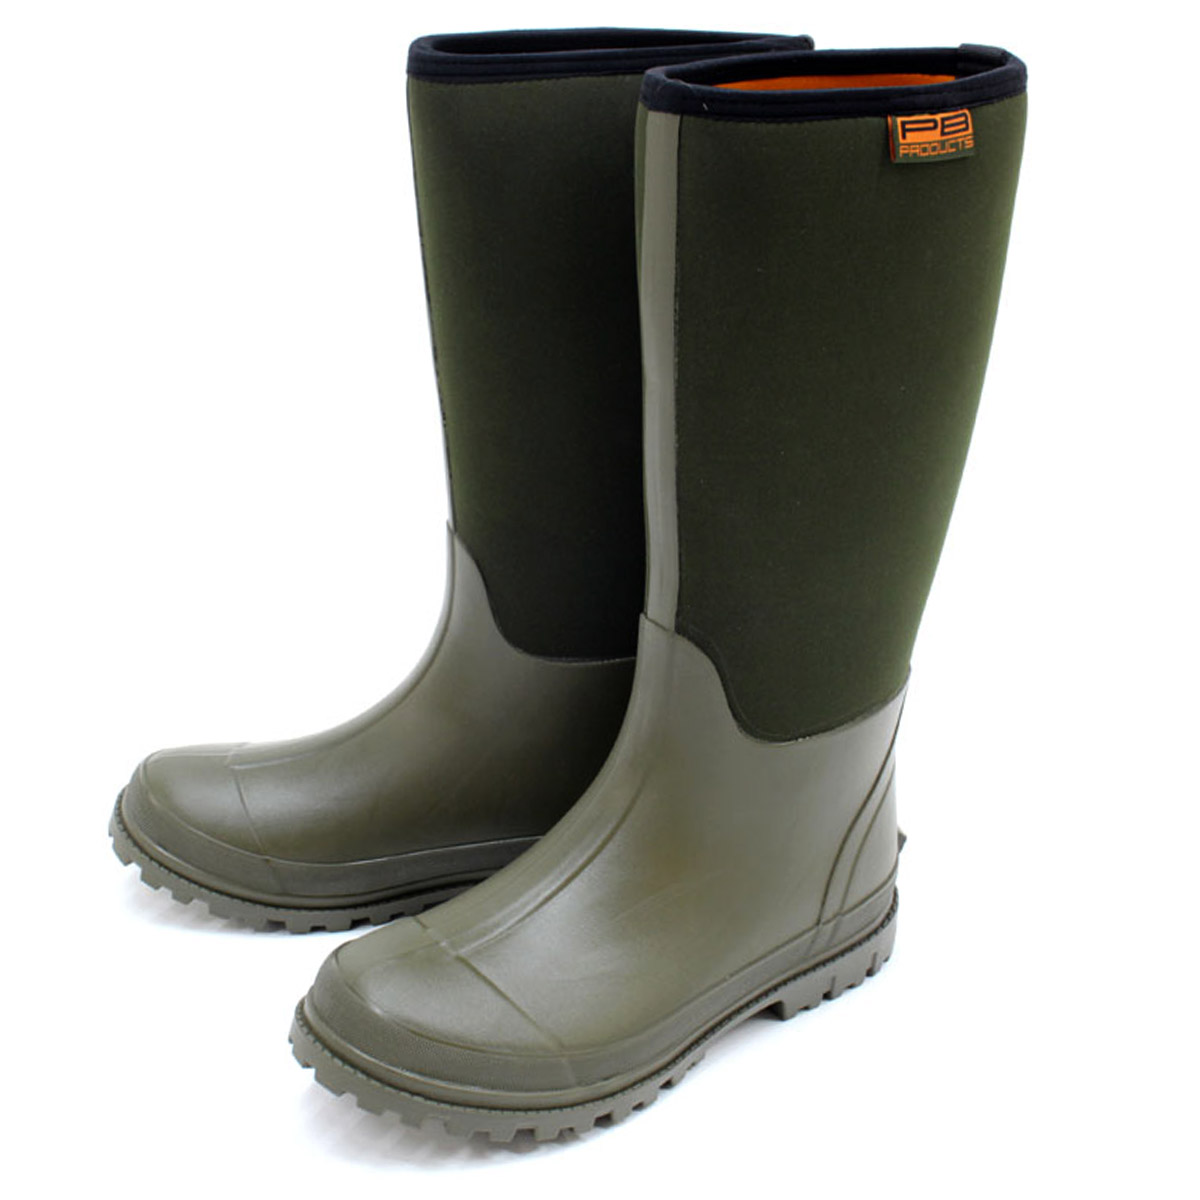 PB Products 6MM Dual Layer Neoprene Boots -  42 -  43 -  44 -  45 -  47 -  46 -  39 -  40 -  41